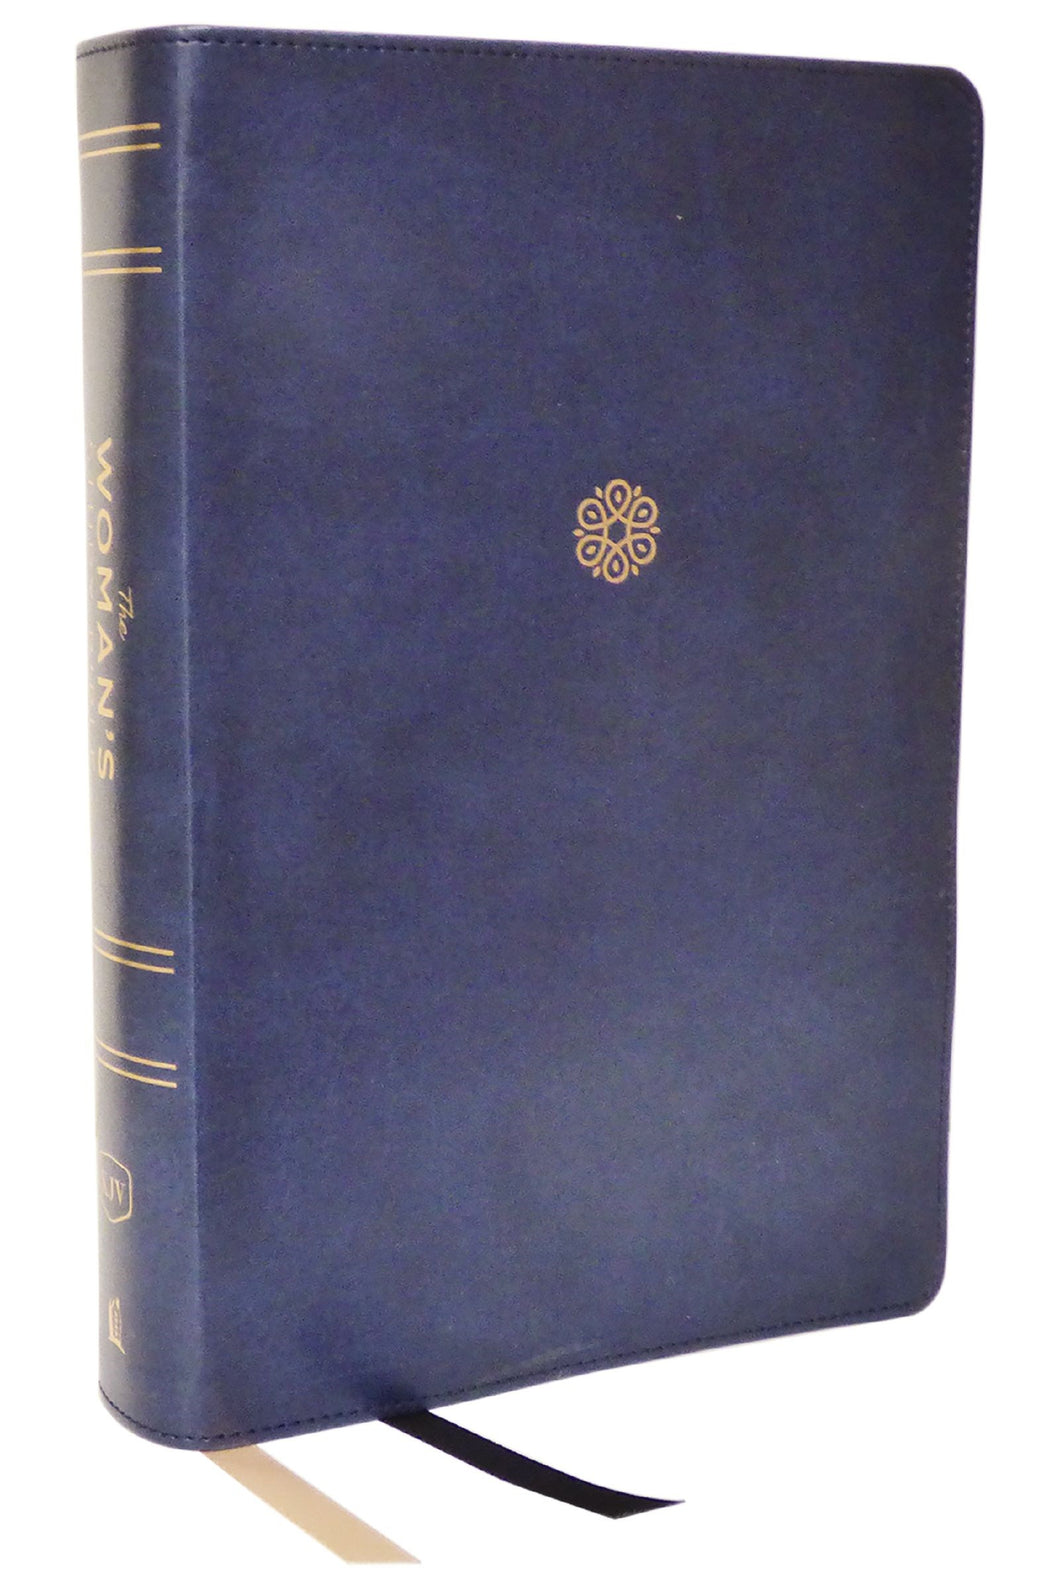 KJV The Woman's Study Bible Full-Color Edition (Comfort Print)-Blue Leathersoft Indexed